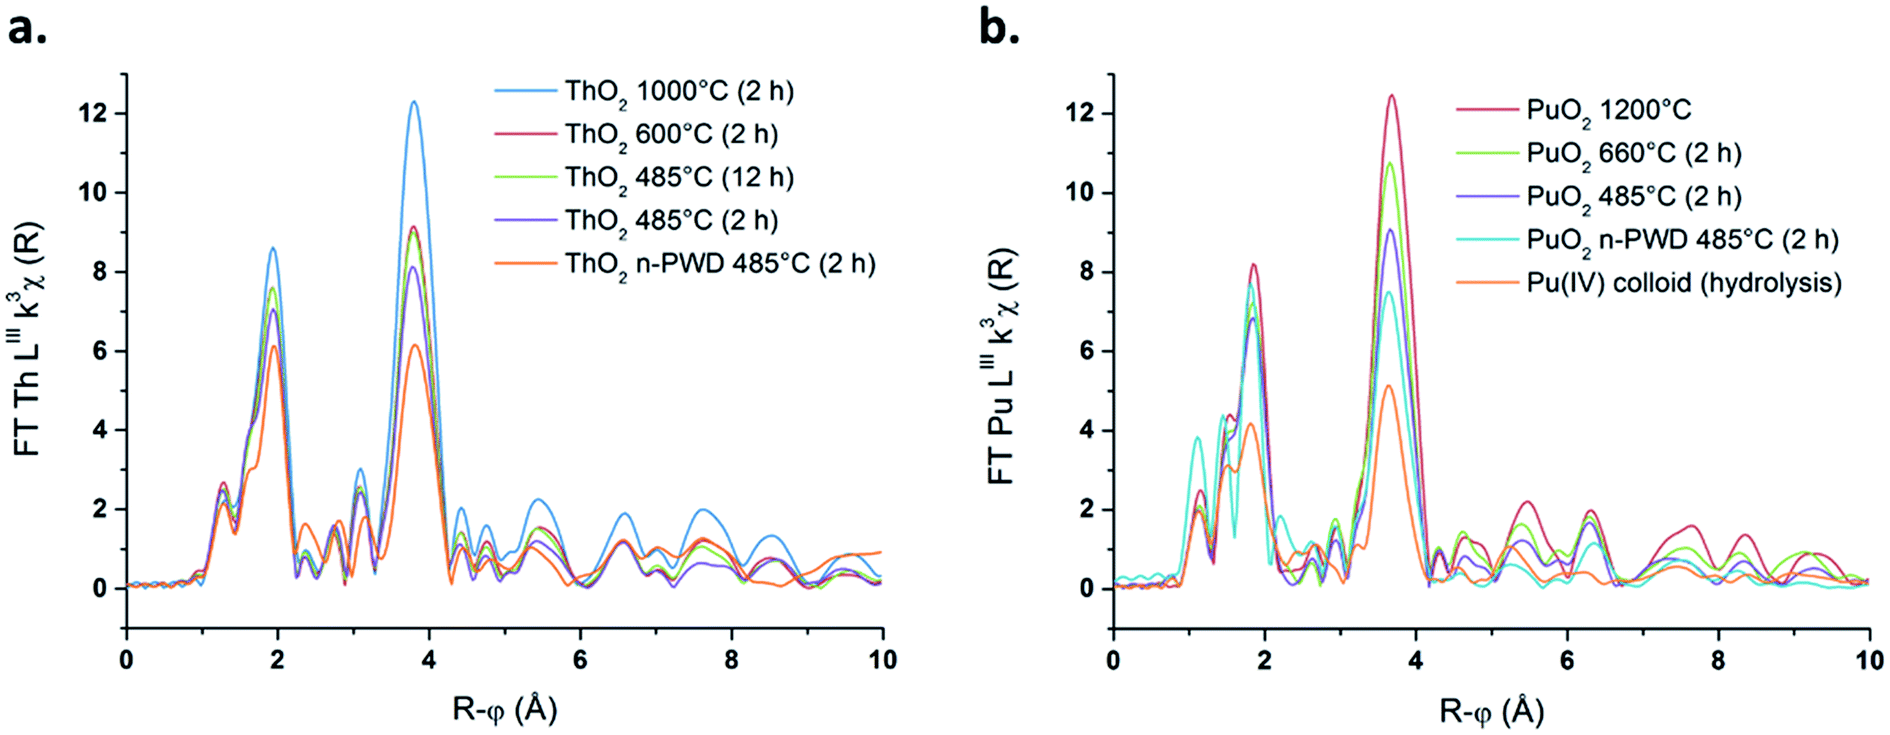 Probing The Local Structure Of Nanoscale Actinide Oxides A Comparison Between Puo 2 And Tho 2 Nanoparticles Rules Out Puo 2 X Hypothesis Nanoscale Advances Rsc Publishing Doi 10 1039 C9na00662a